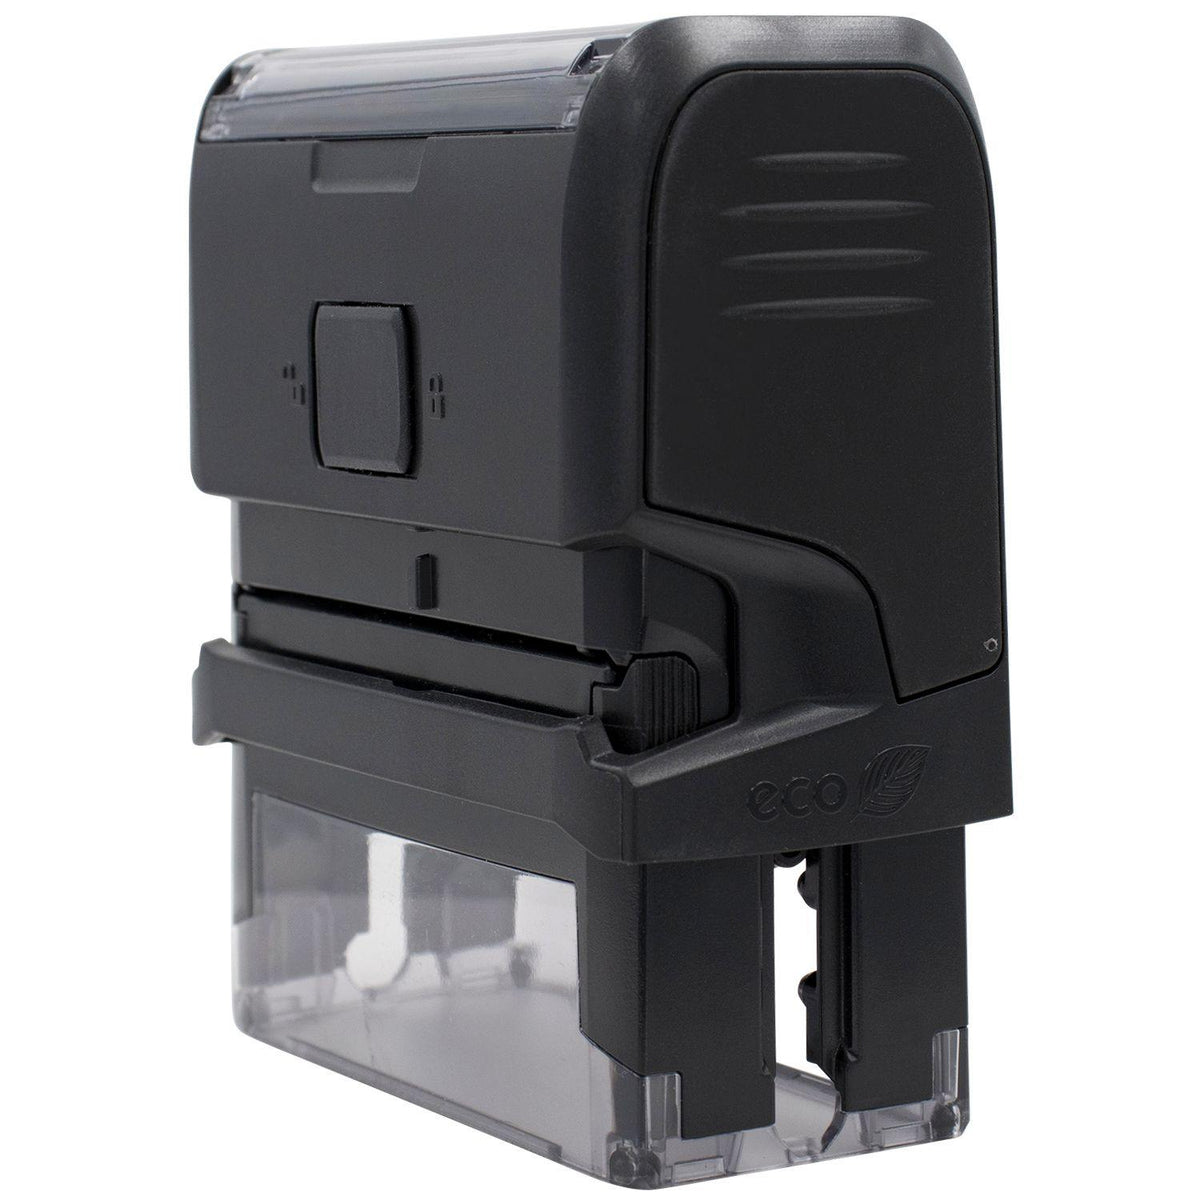 Side View of Large Self-Inking Avis De Receiption Stamp at an Angle